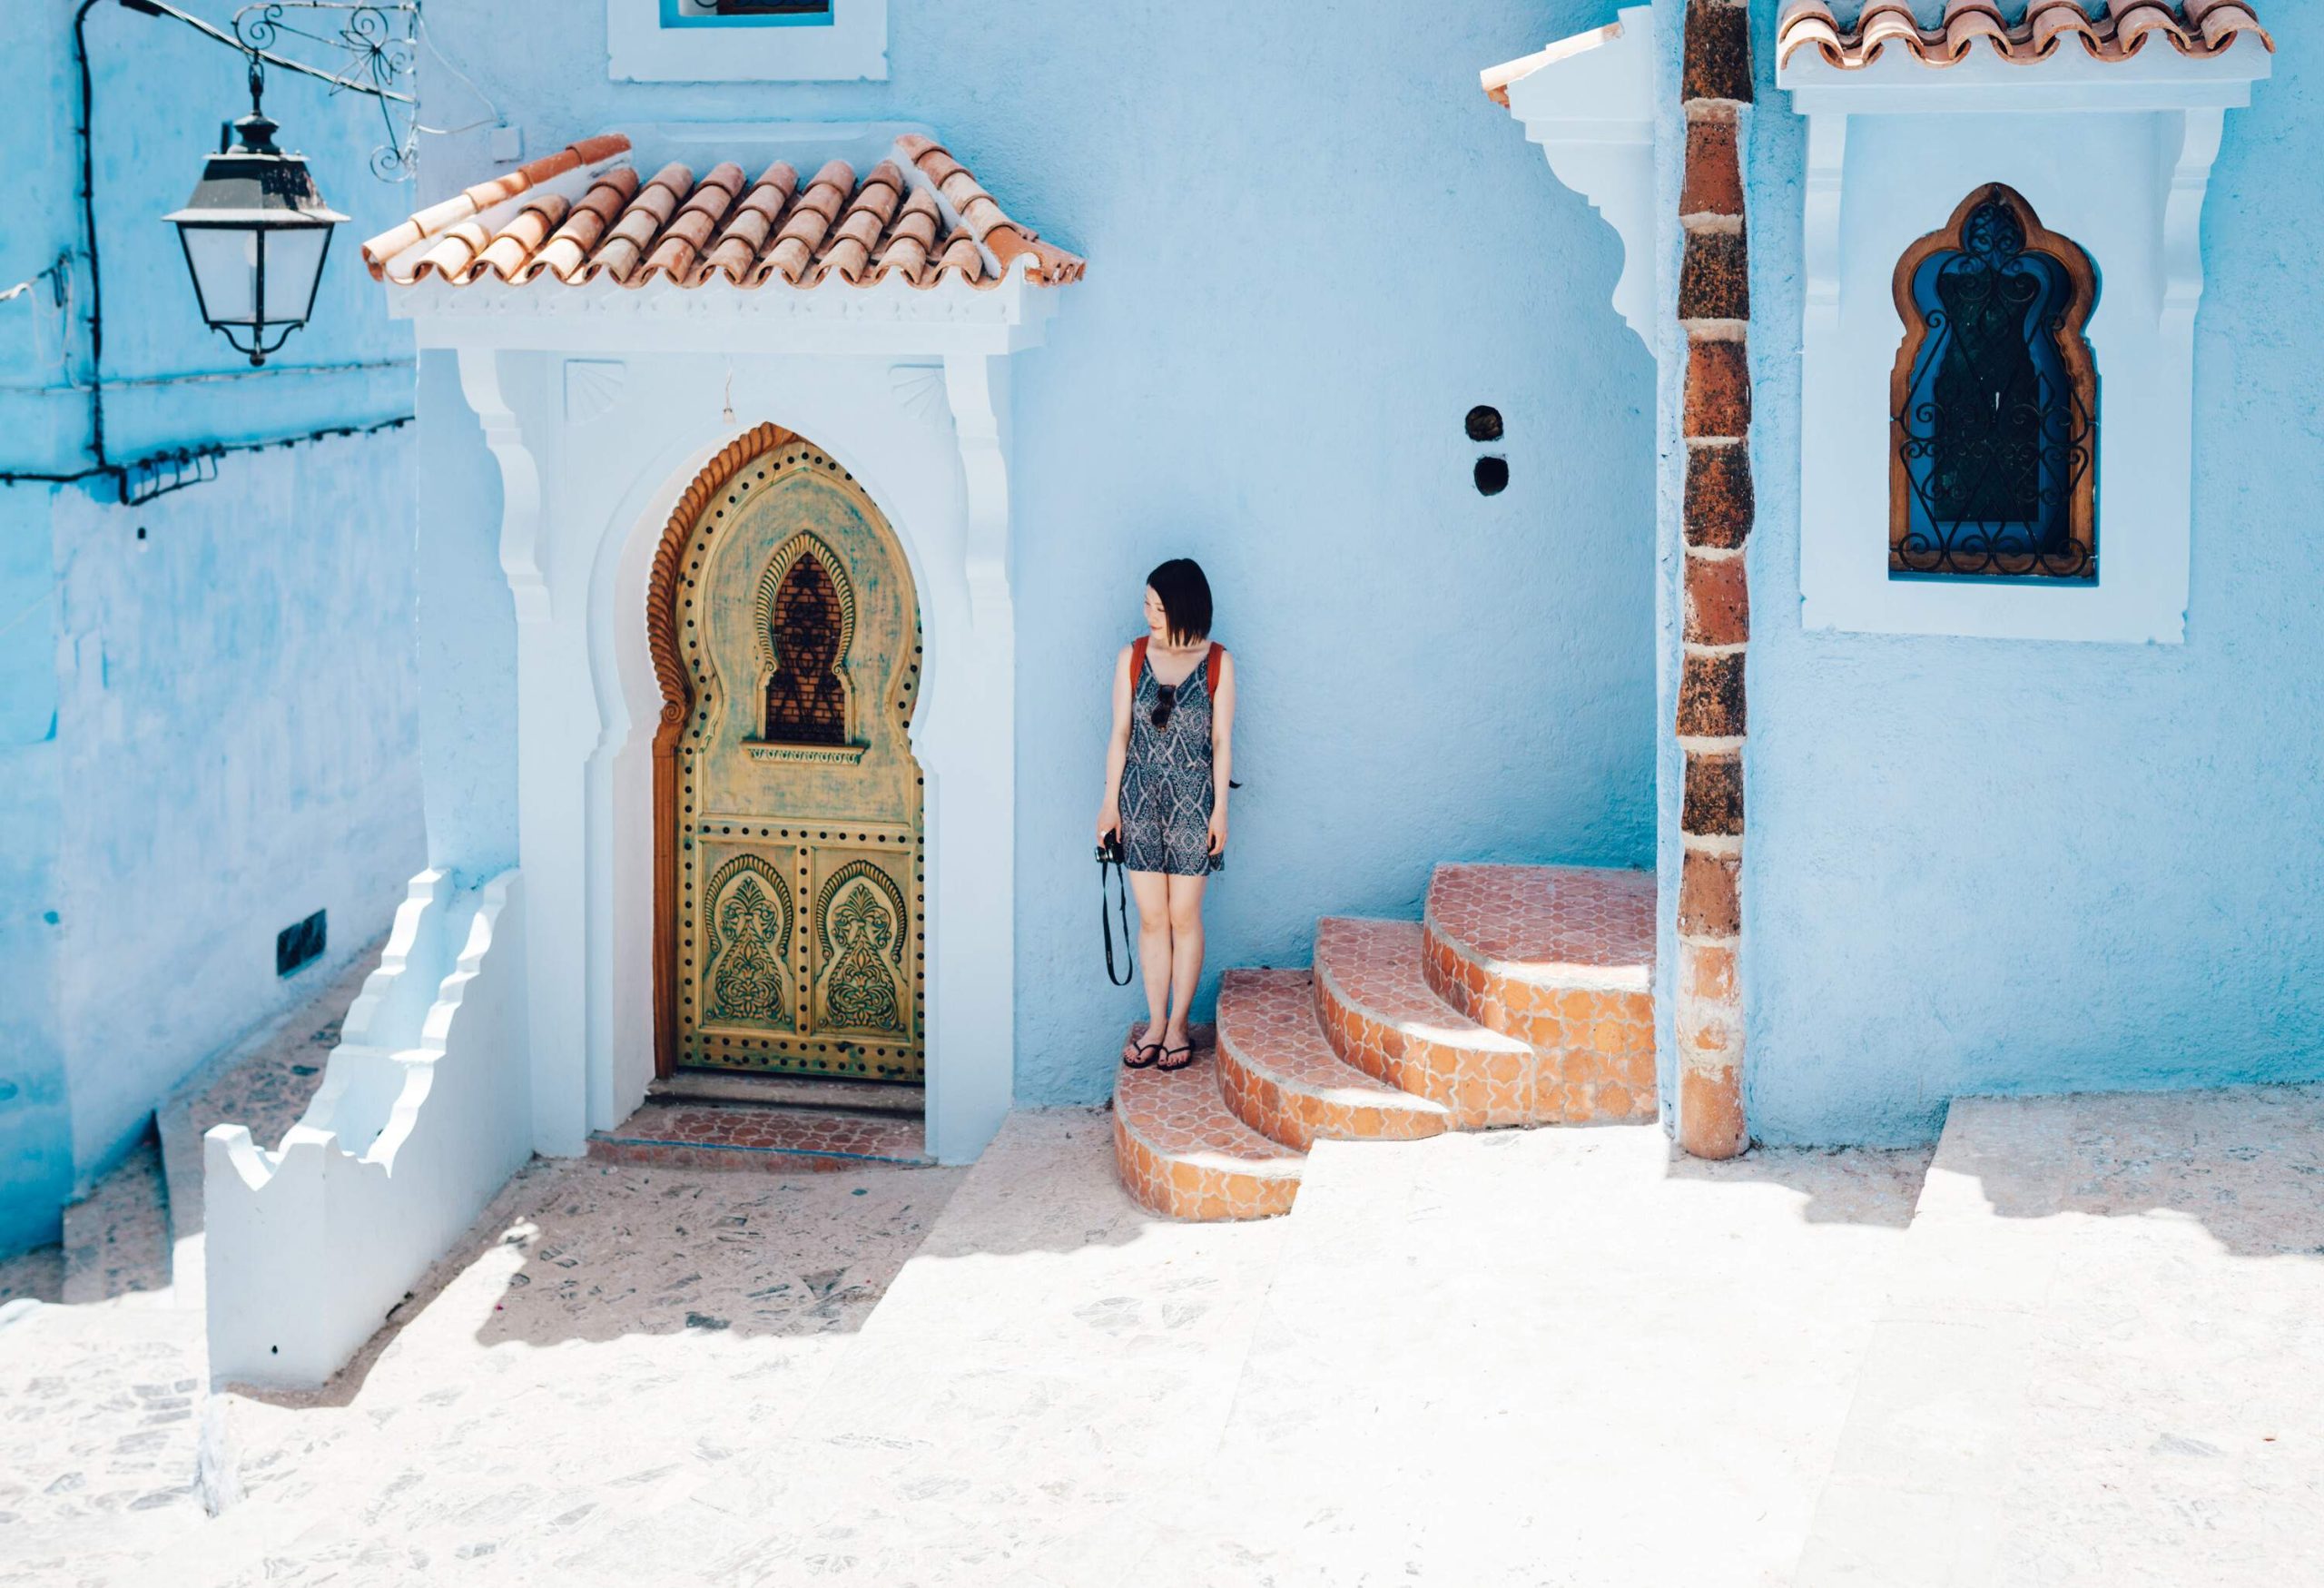 A young lady stands on the stair beside the charming ornate door of a villa with a blue-painted wall.